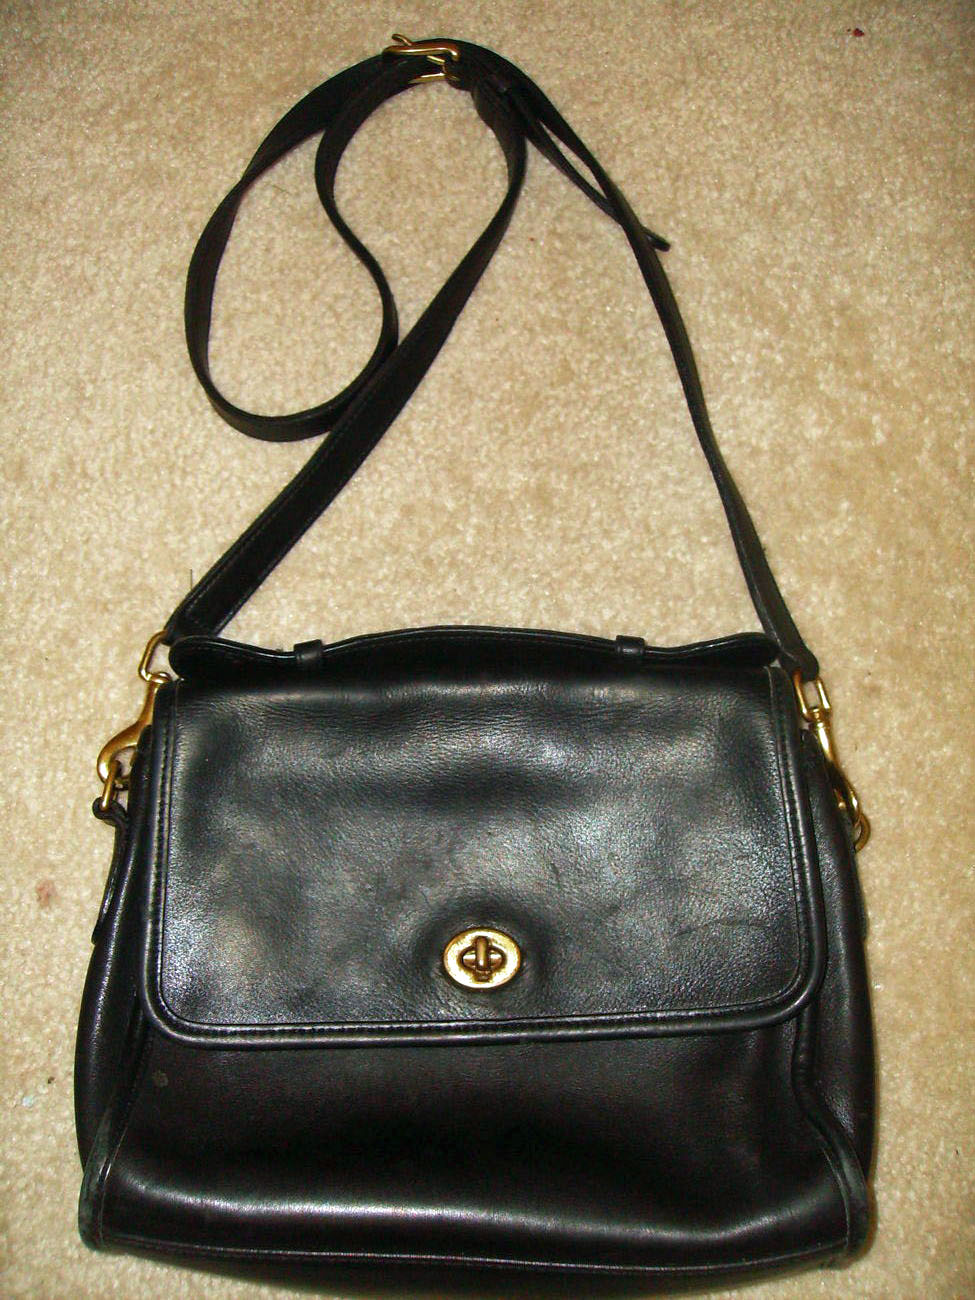 Renee&#39;s Chirpings: Check Thrift Stores For Authentic Coach Purses